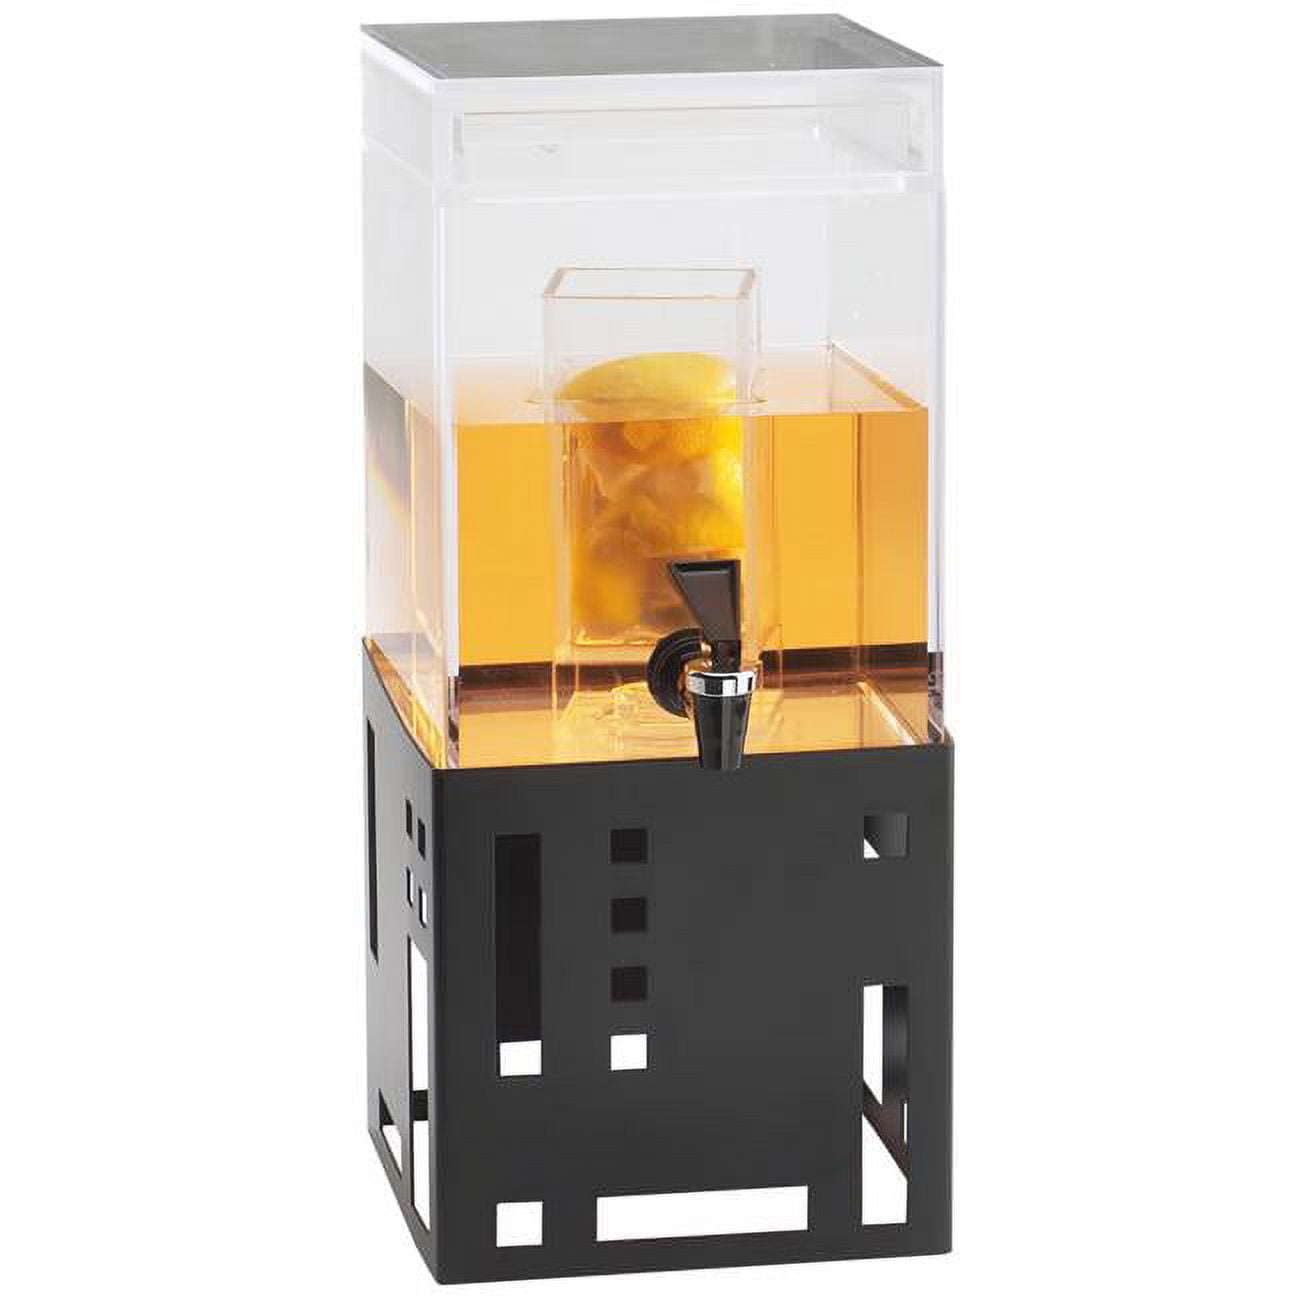 Picture of Cal Mil 1602-1INF-13 1.5 gal Black Beverage Dispenser with Infusion Chamber - 7.5 x 9.5 x 17.75 in.